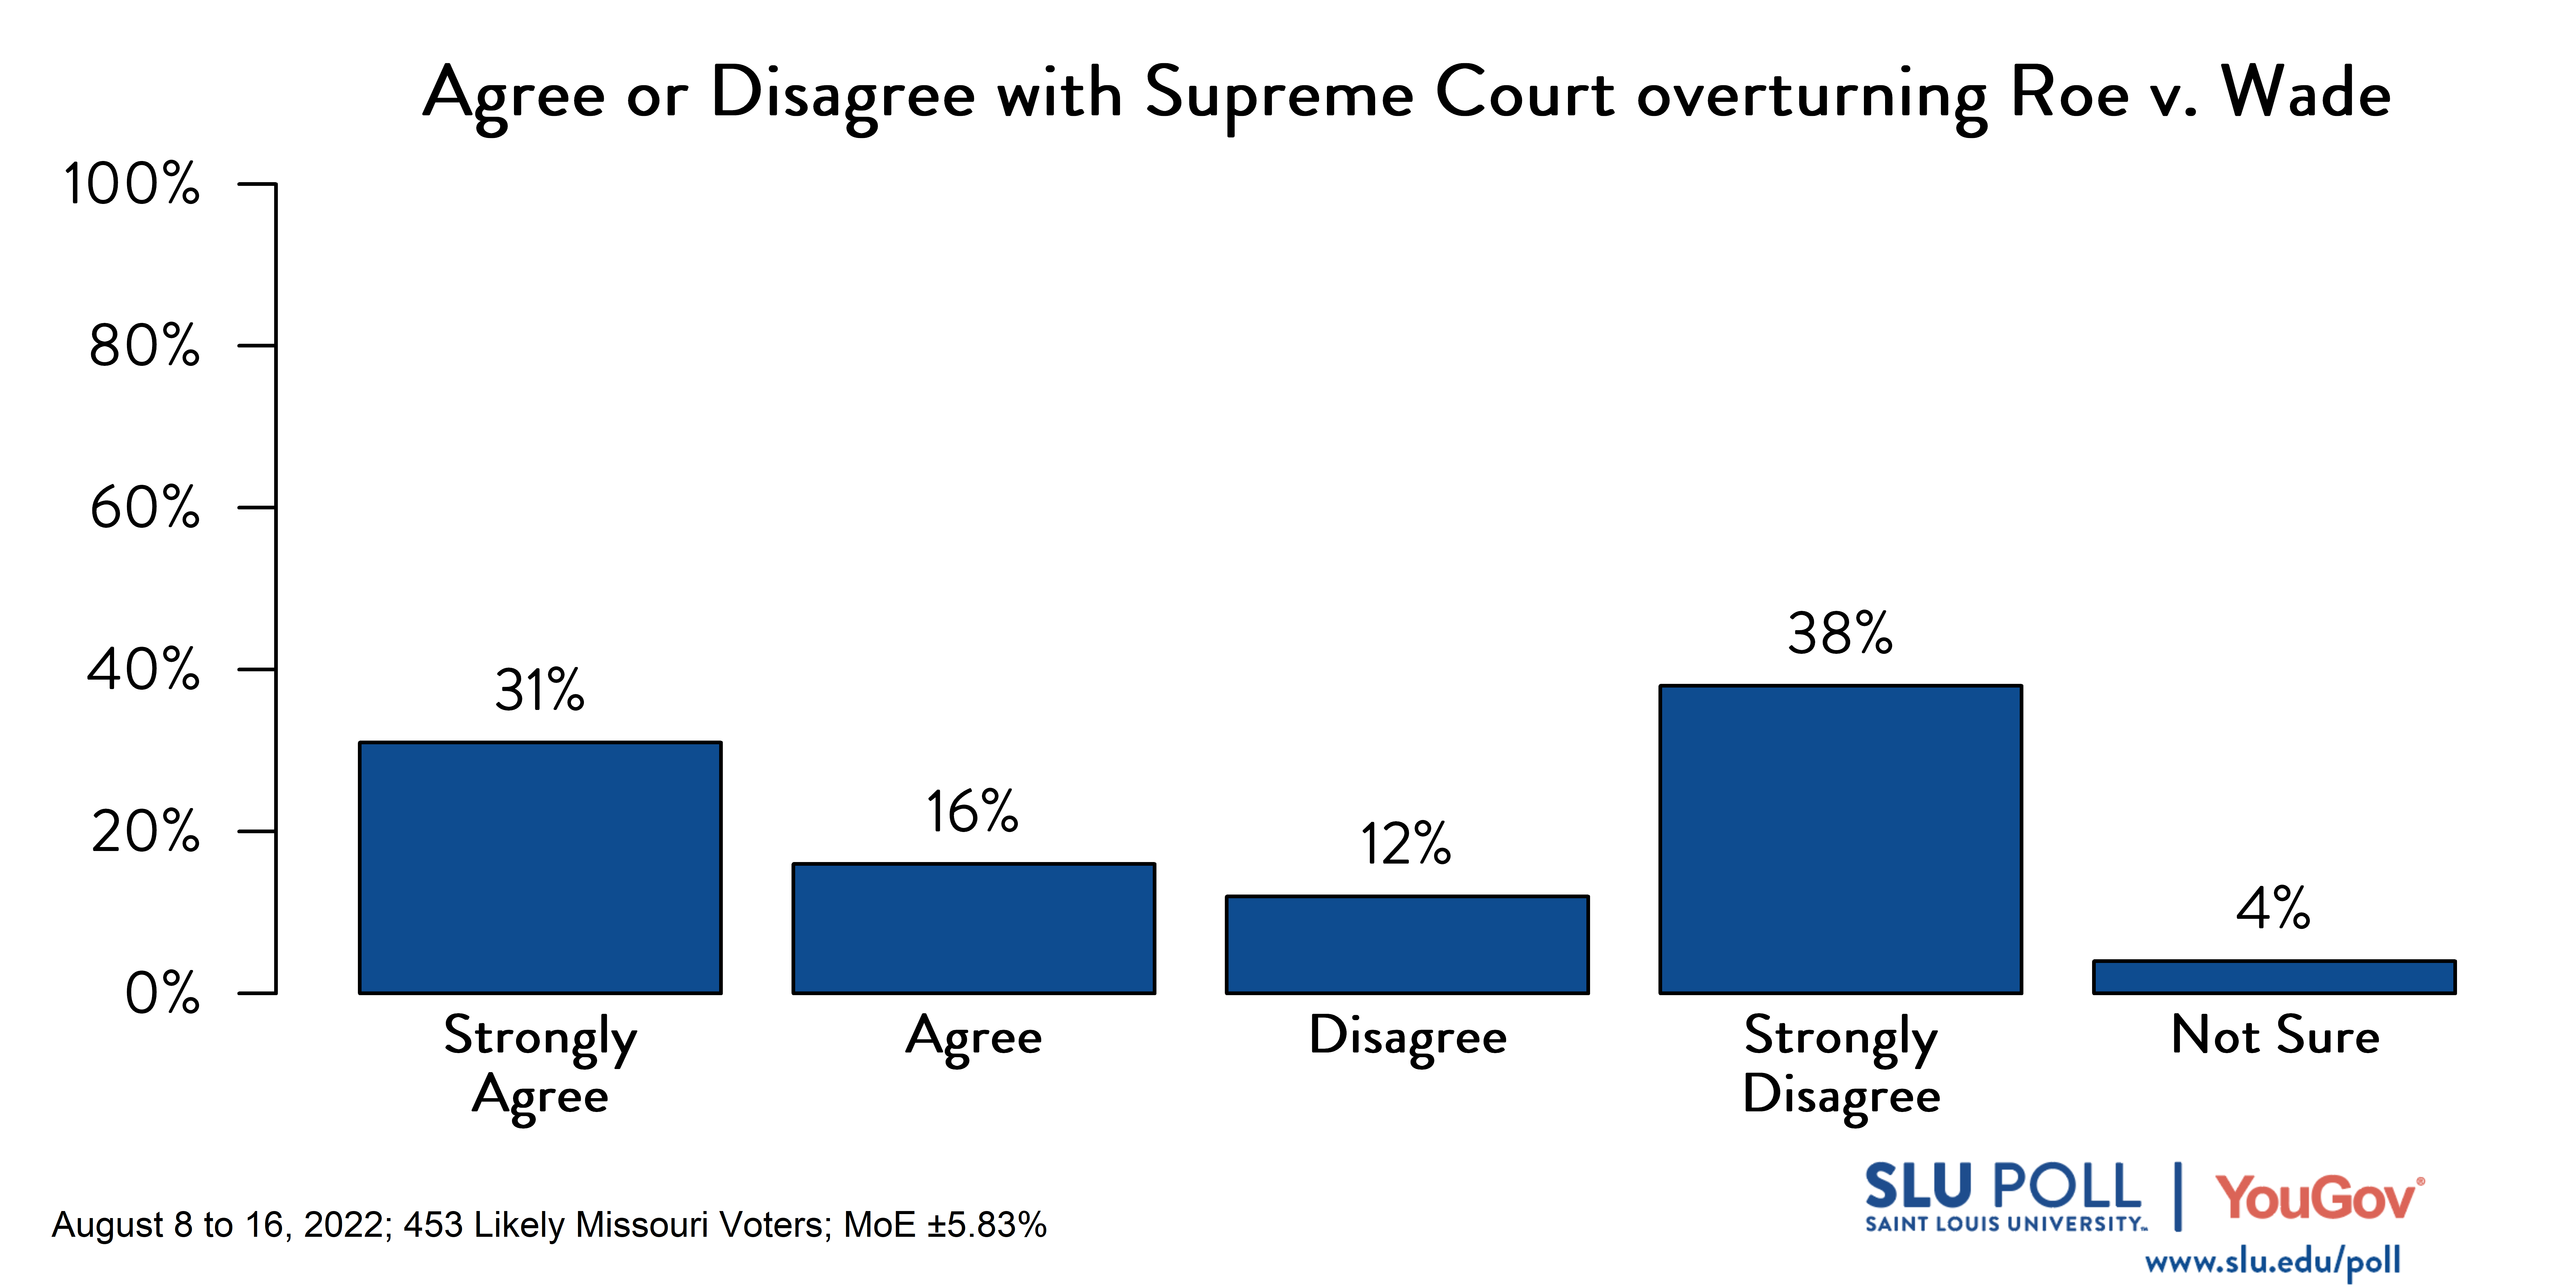 This graph shows the responses given when asked whether respondents agree or disagree with the Supreme Court overturning Roe v. Wade. 31% strongly agree, 16% agree, 12% disagree, 38% strongly disagree, and 4% are not sure.